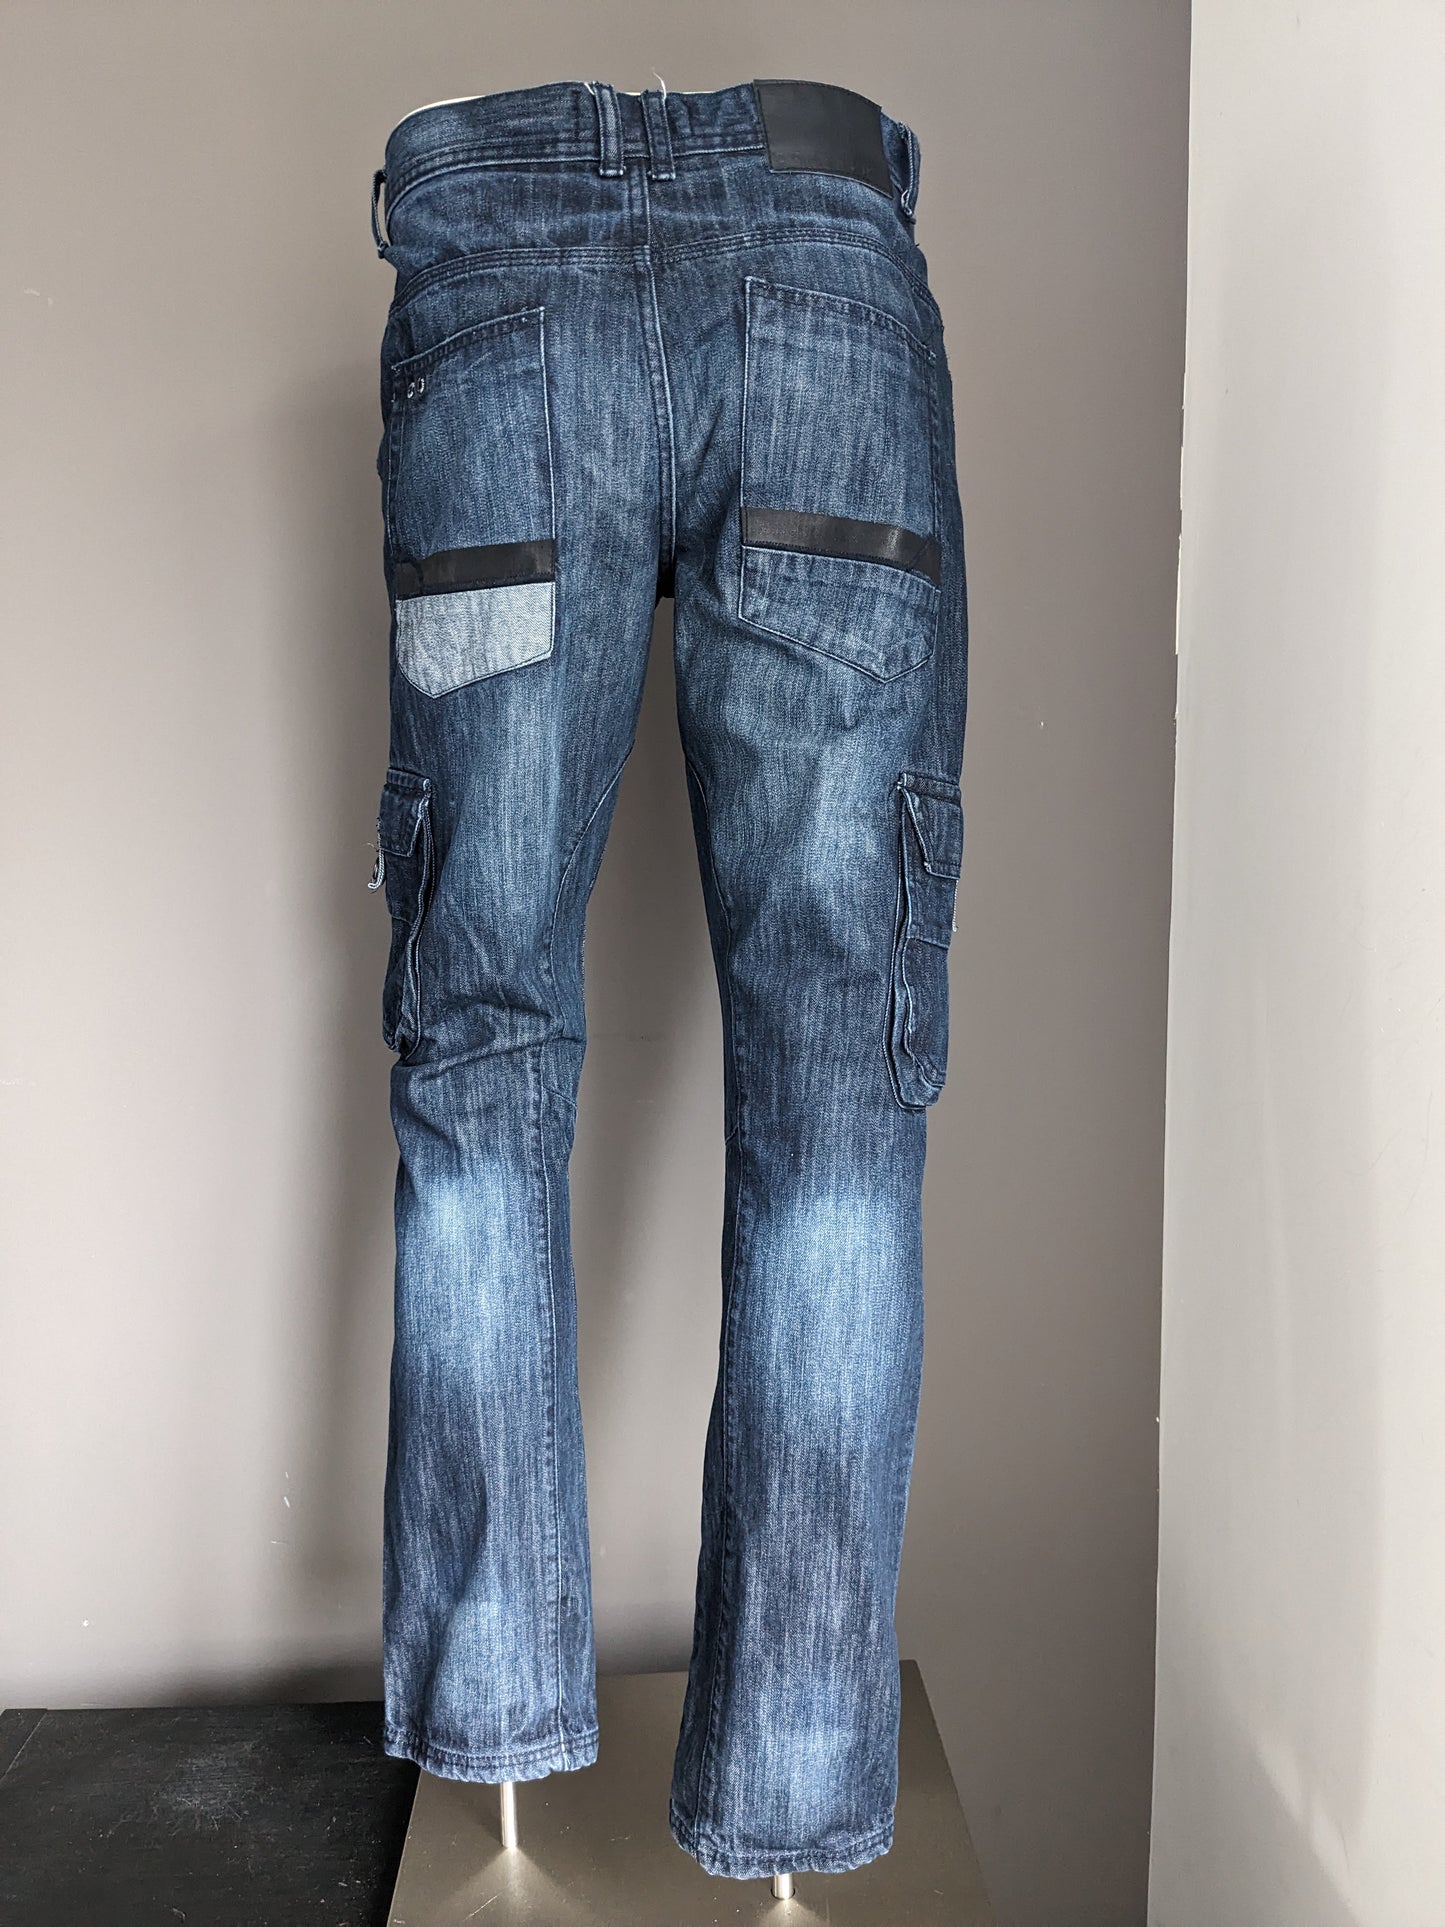 Crafted Jeans. Dark blue colored. Size W32 - L34.